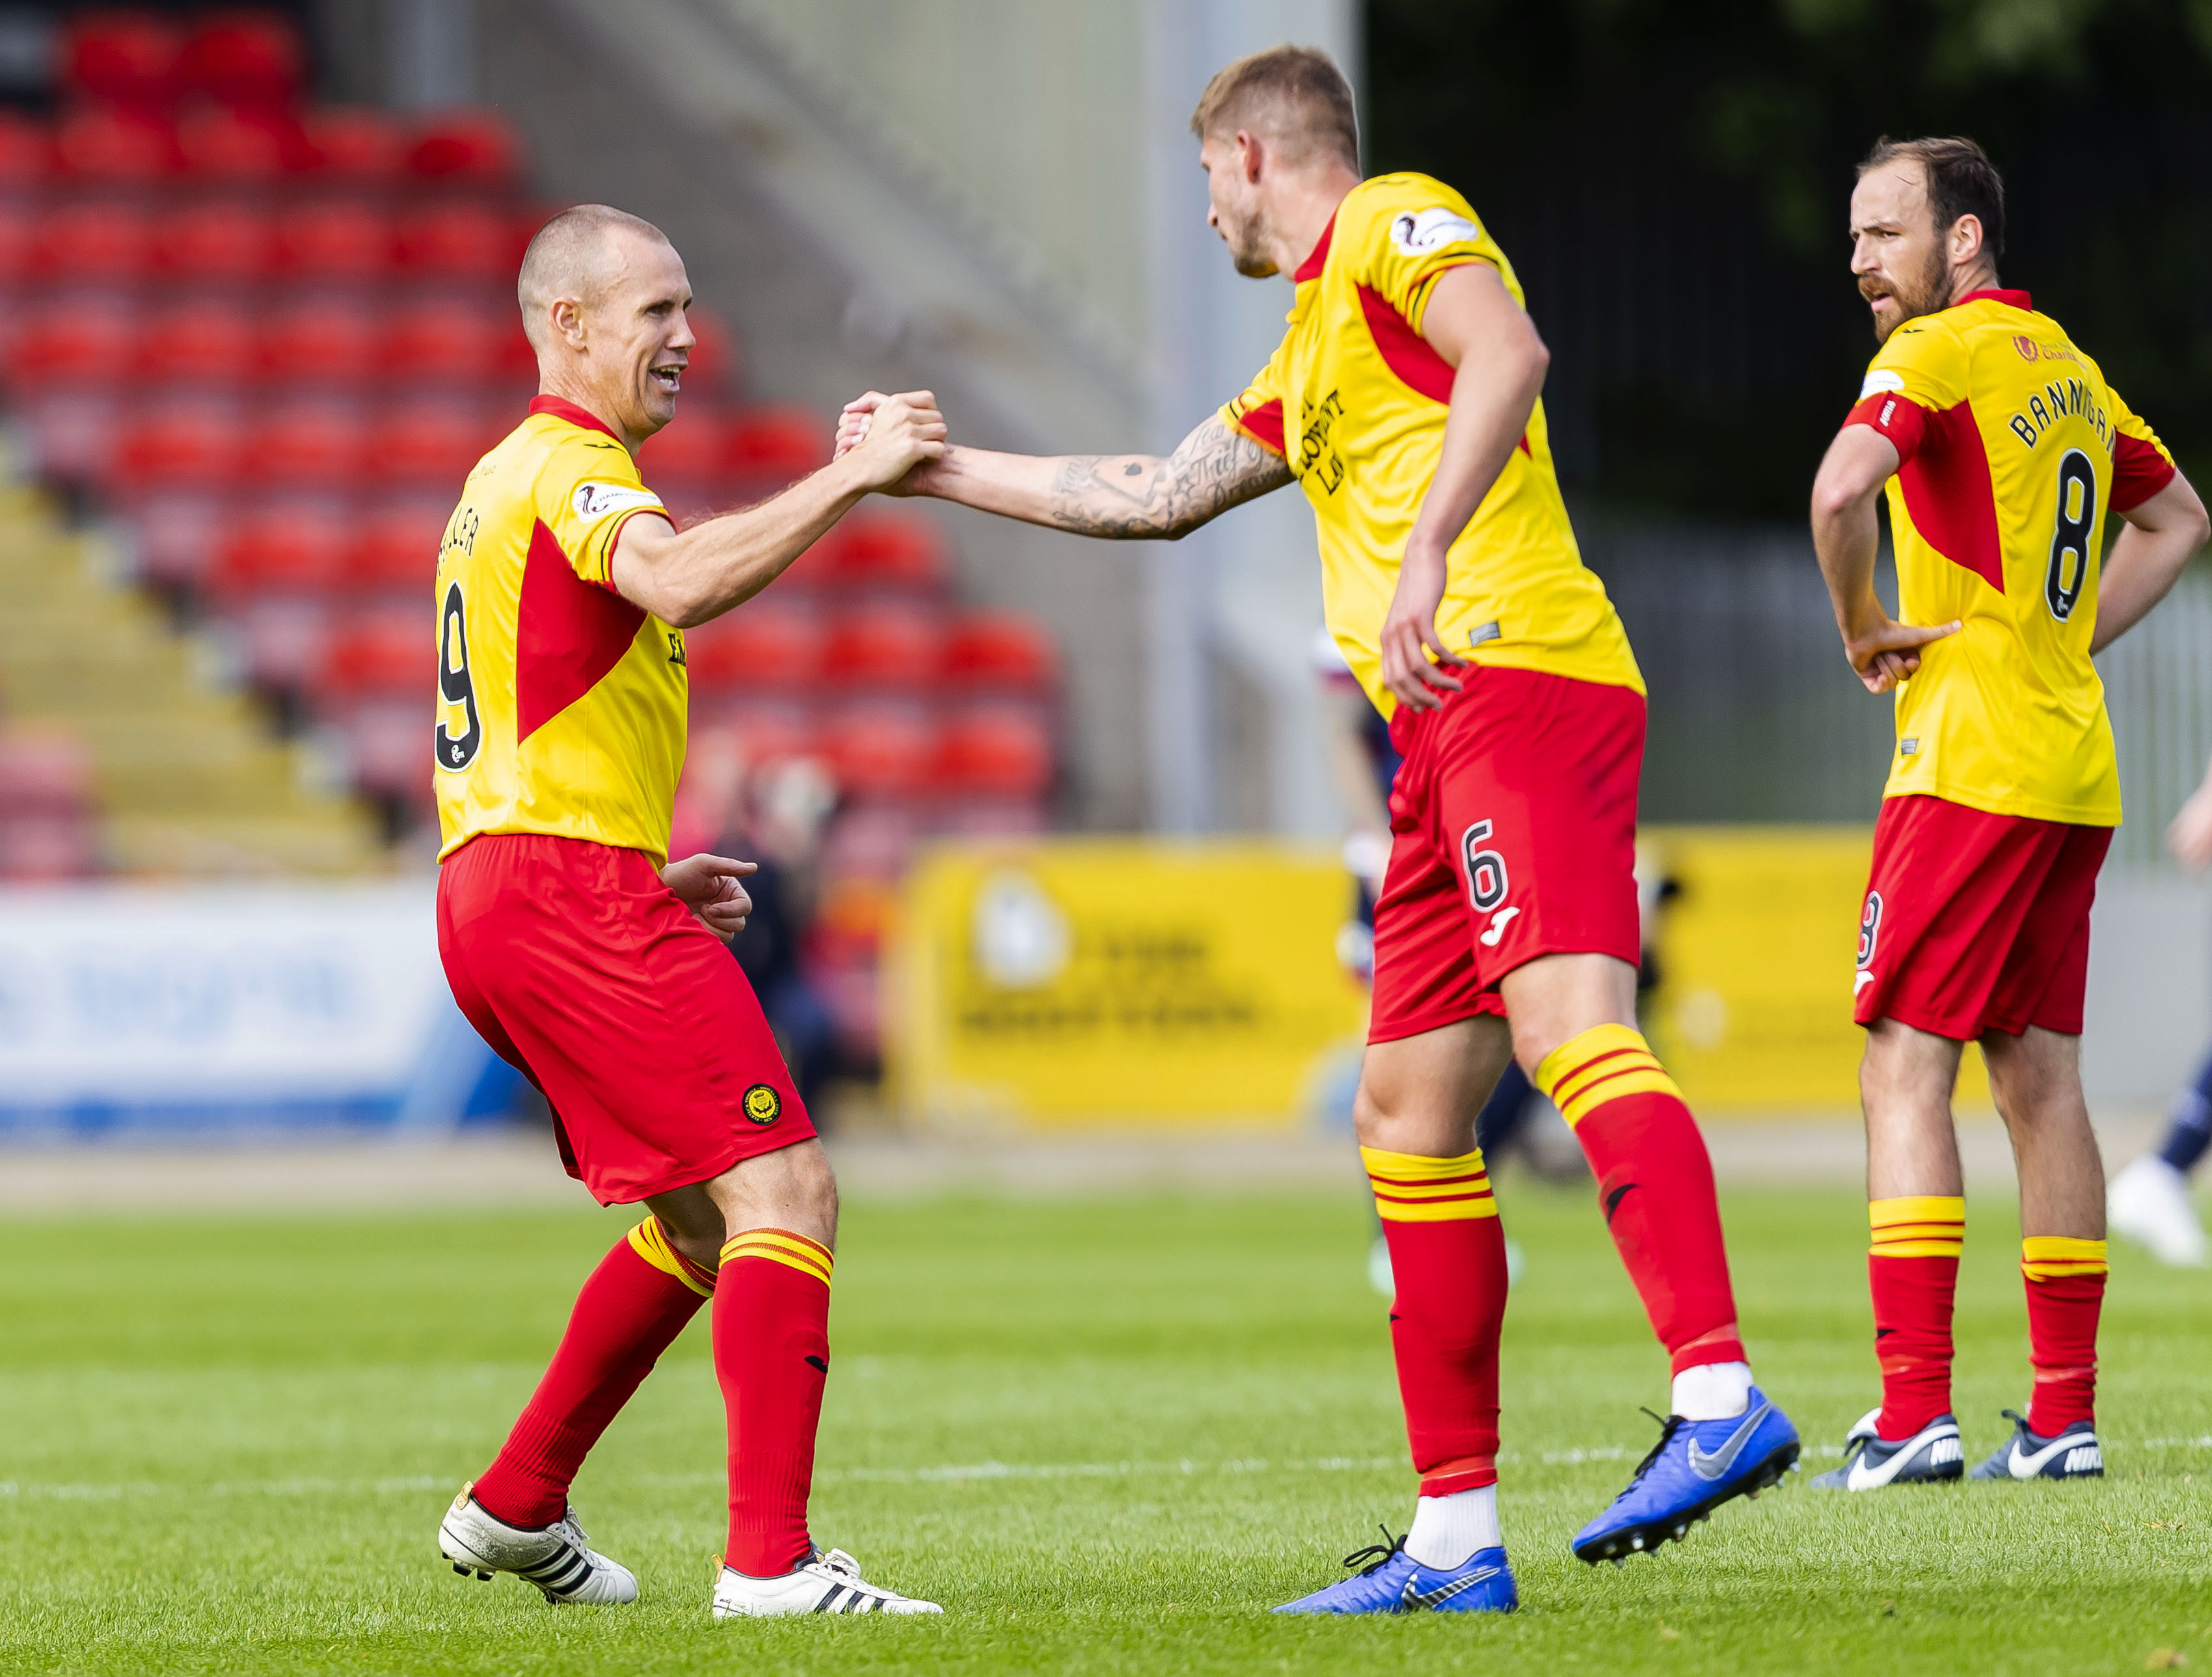 Partick's Kenny Millar (L) celebrates his equalizer with teammate Sean McGinty